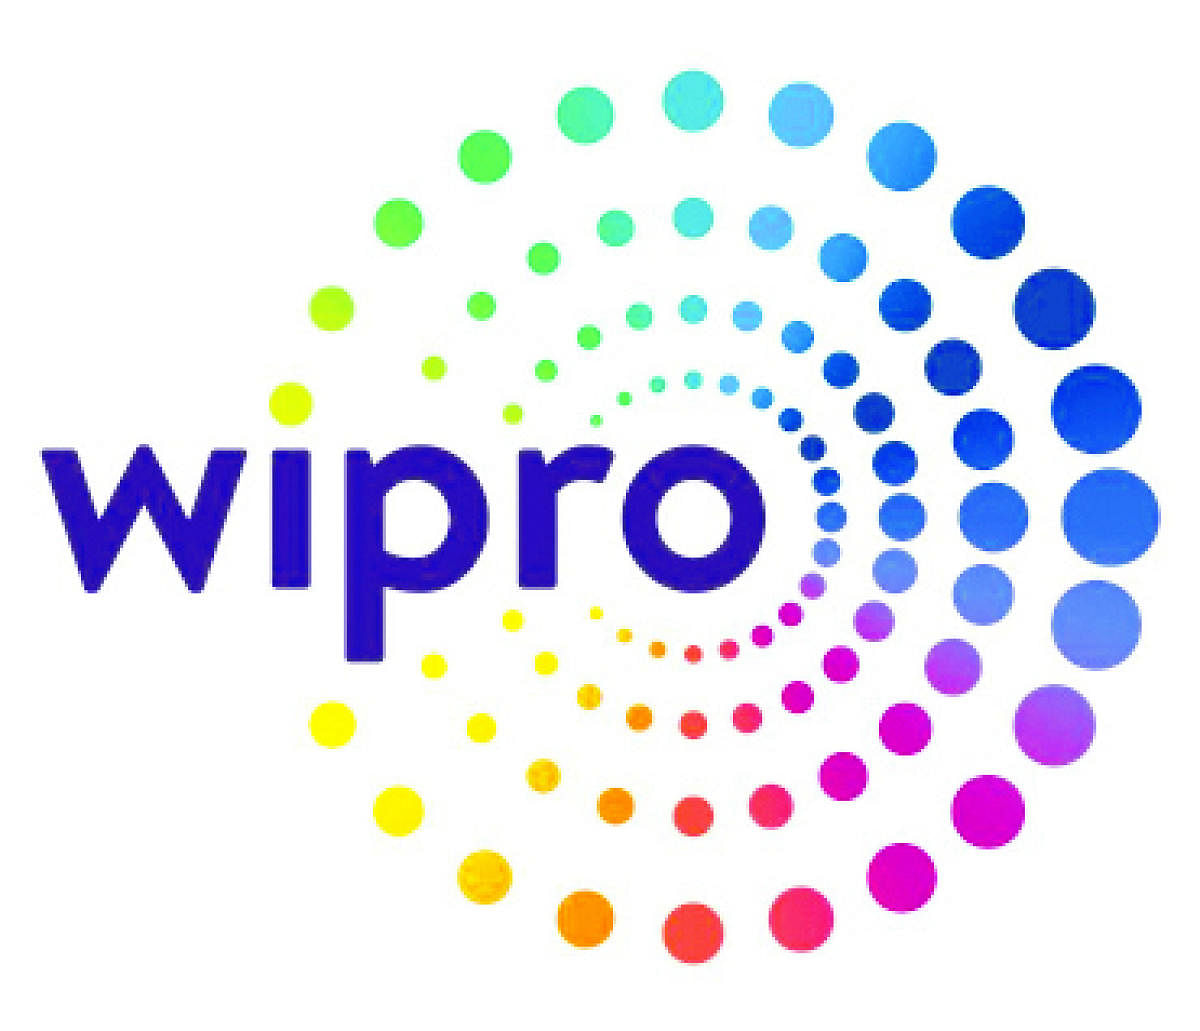 This deal will result in revenues of US $1.5 to $1.6 billion for Wipro over the tenure.